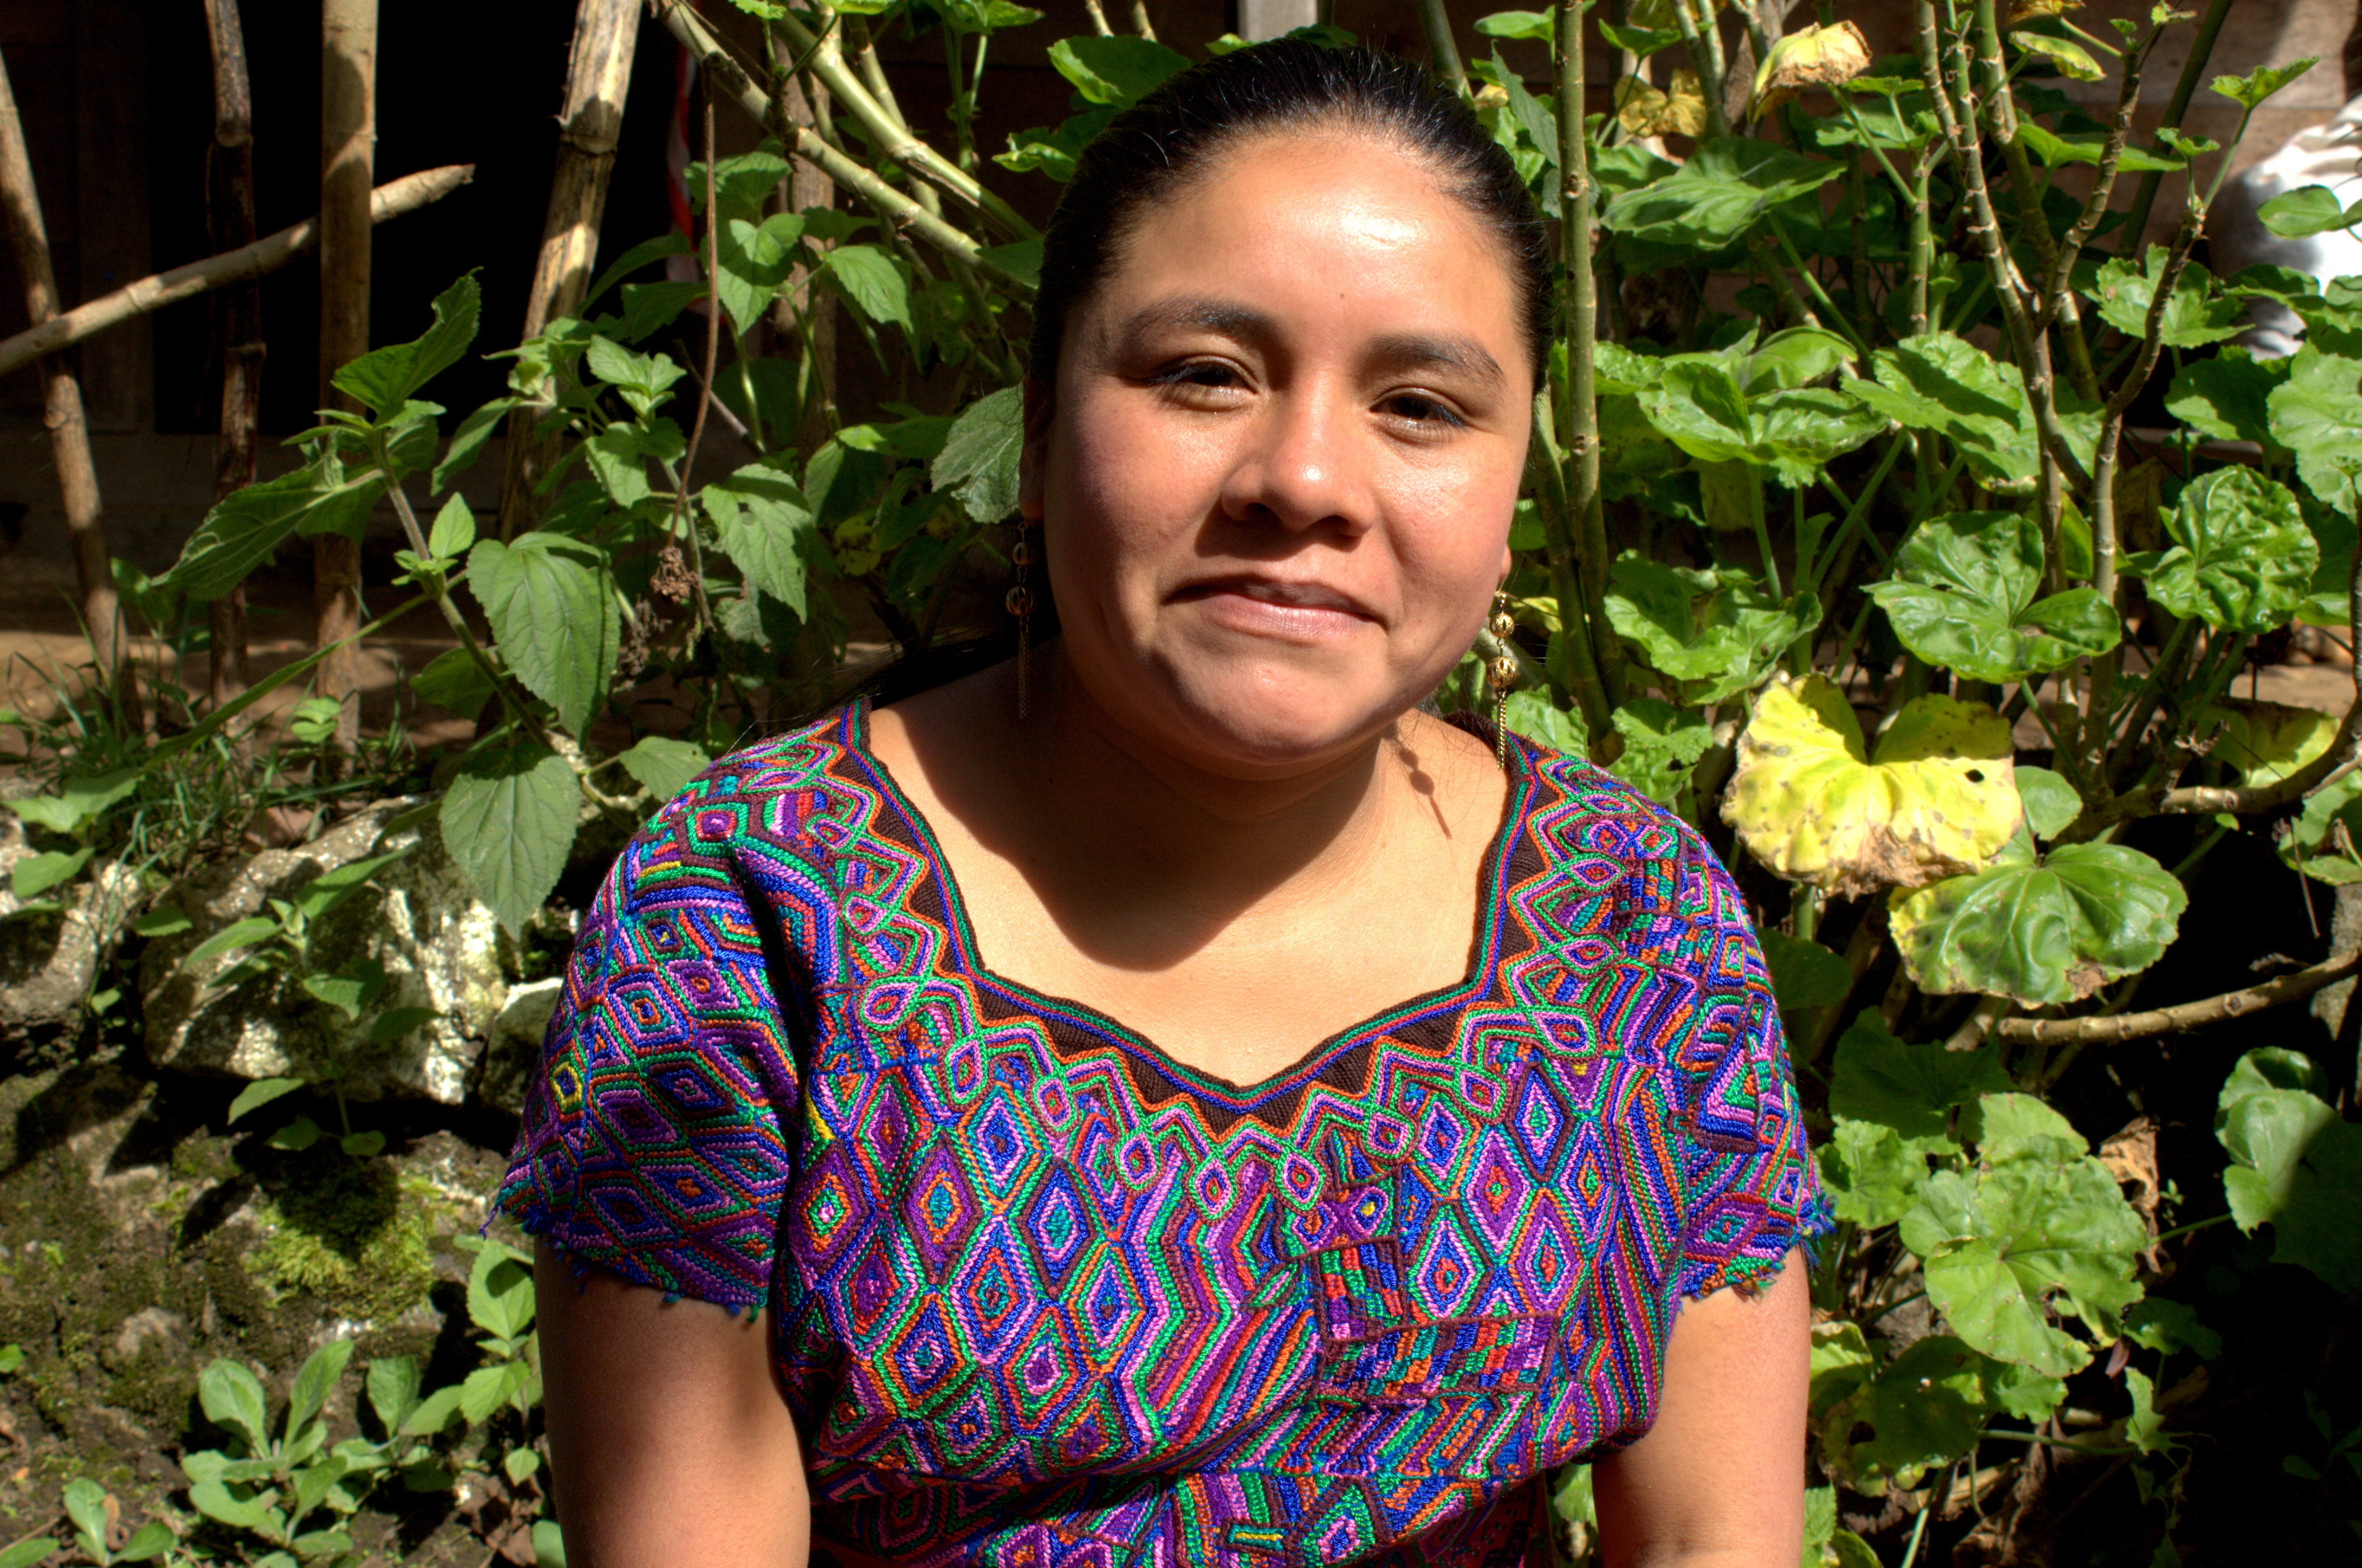 Josefina’s story: Give today to support women leaders for tomorrow